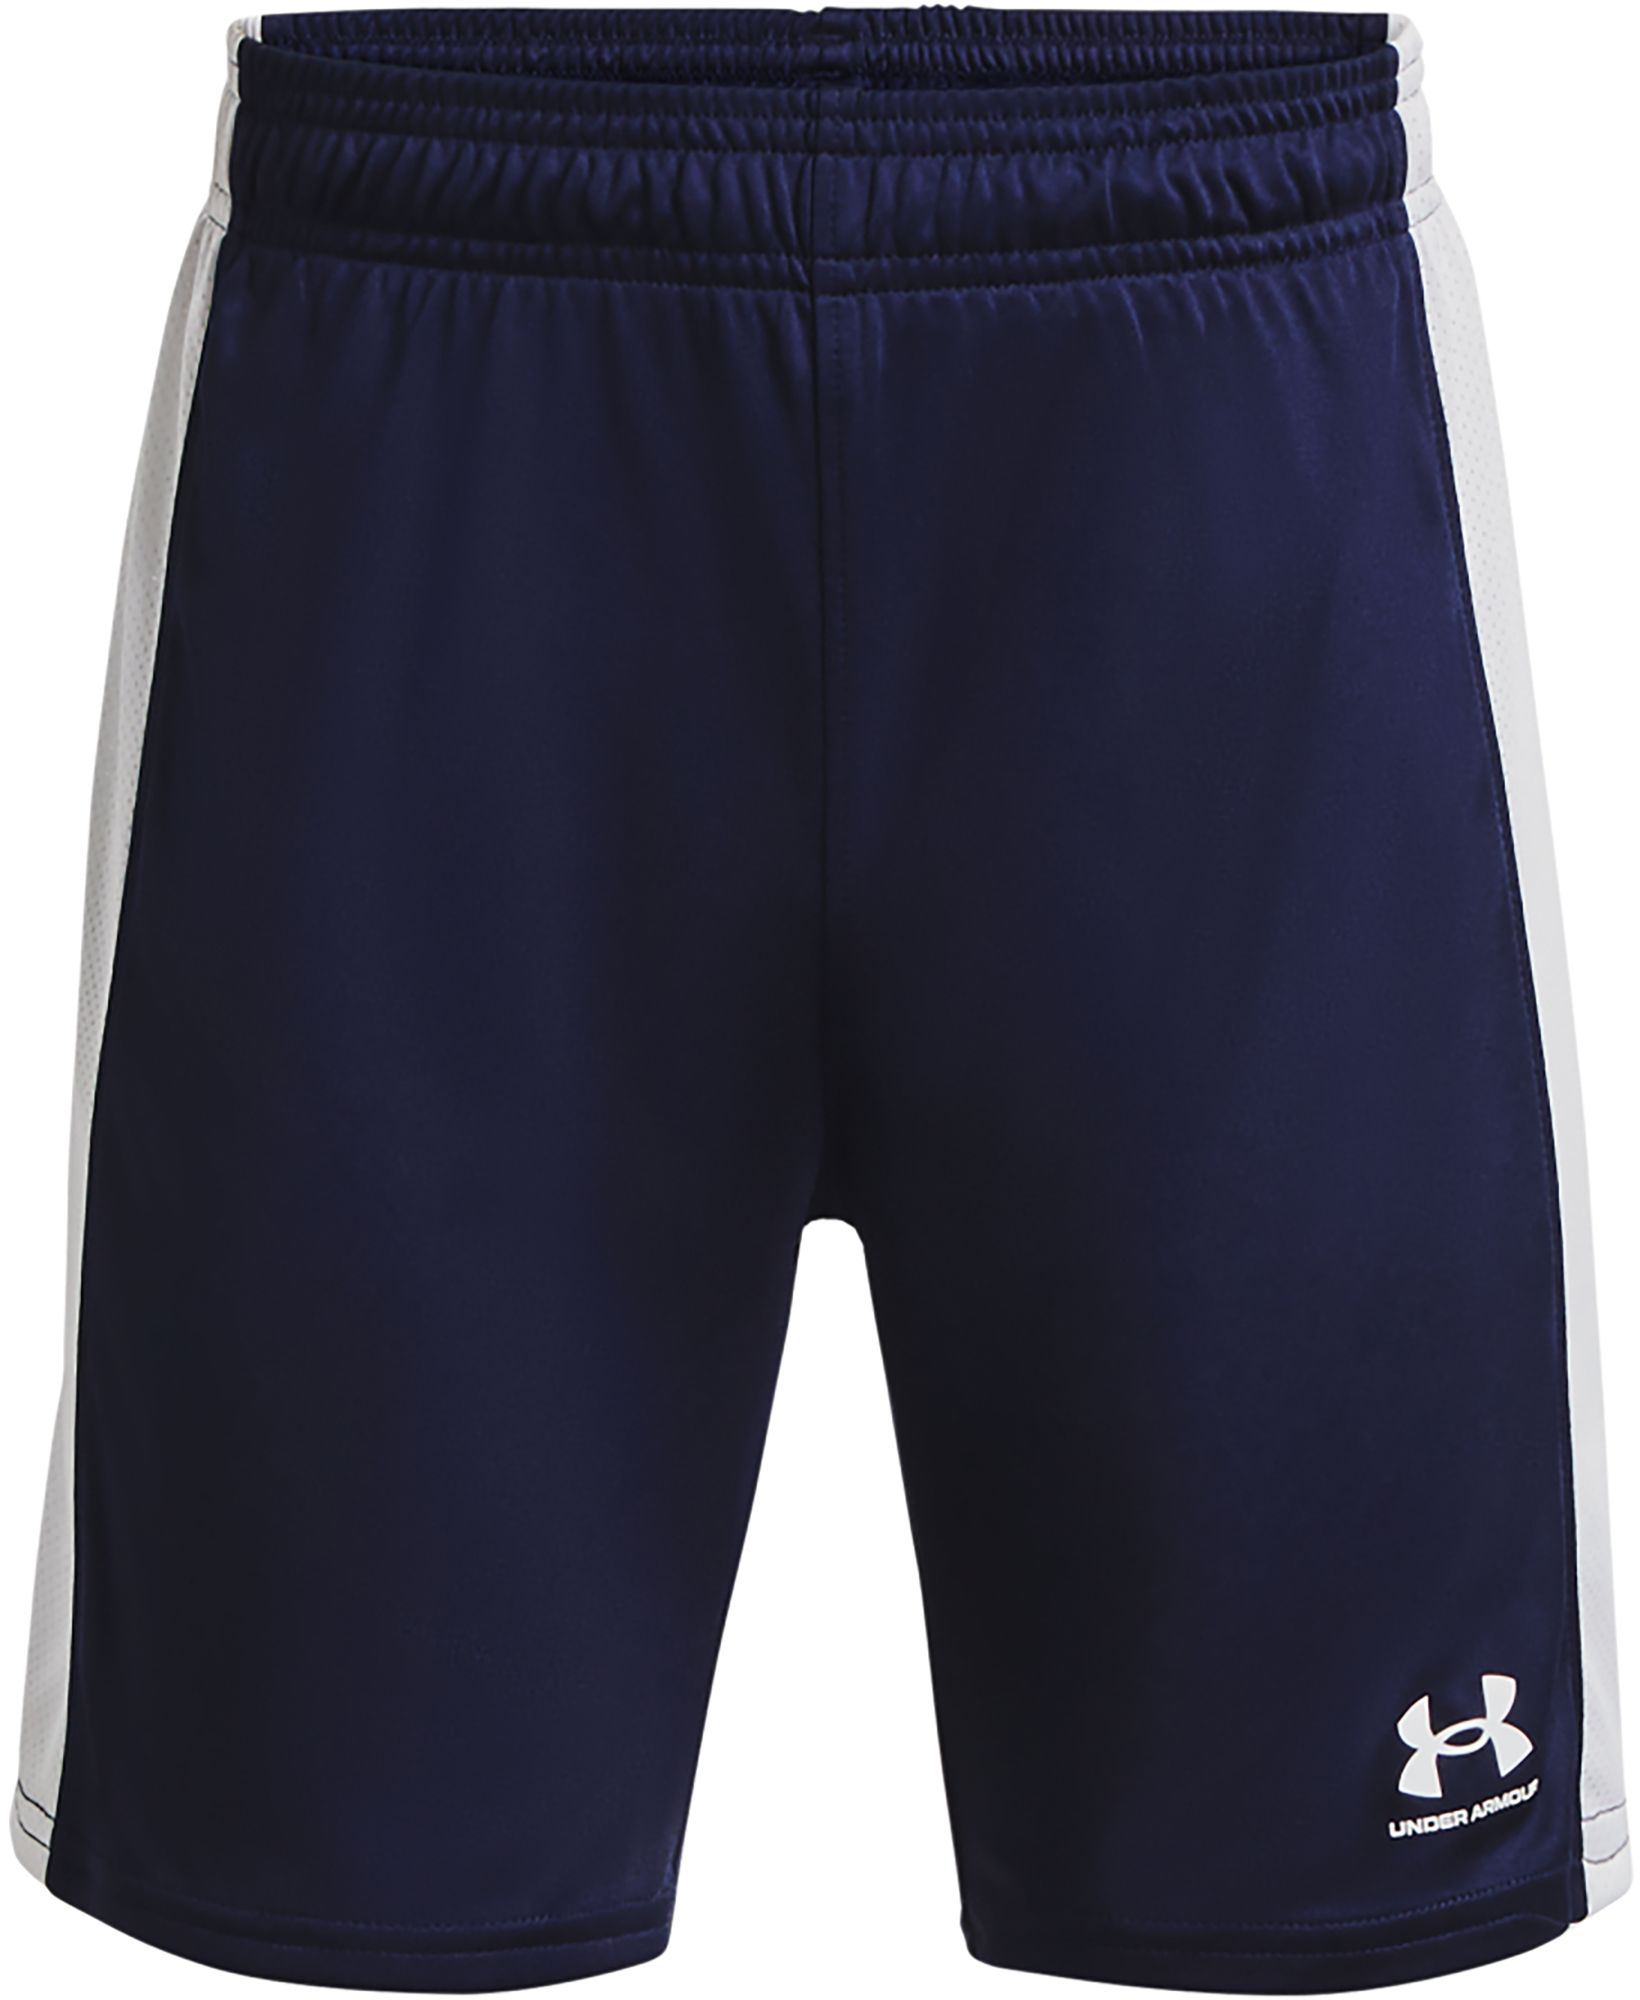 UNDER ARMOUR BOYS' CHALLENGER KNIT SHORTS INTERNATIONAL SHIPPING